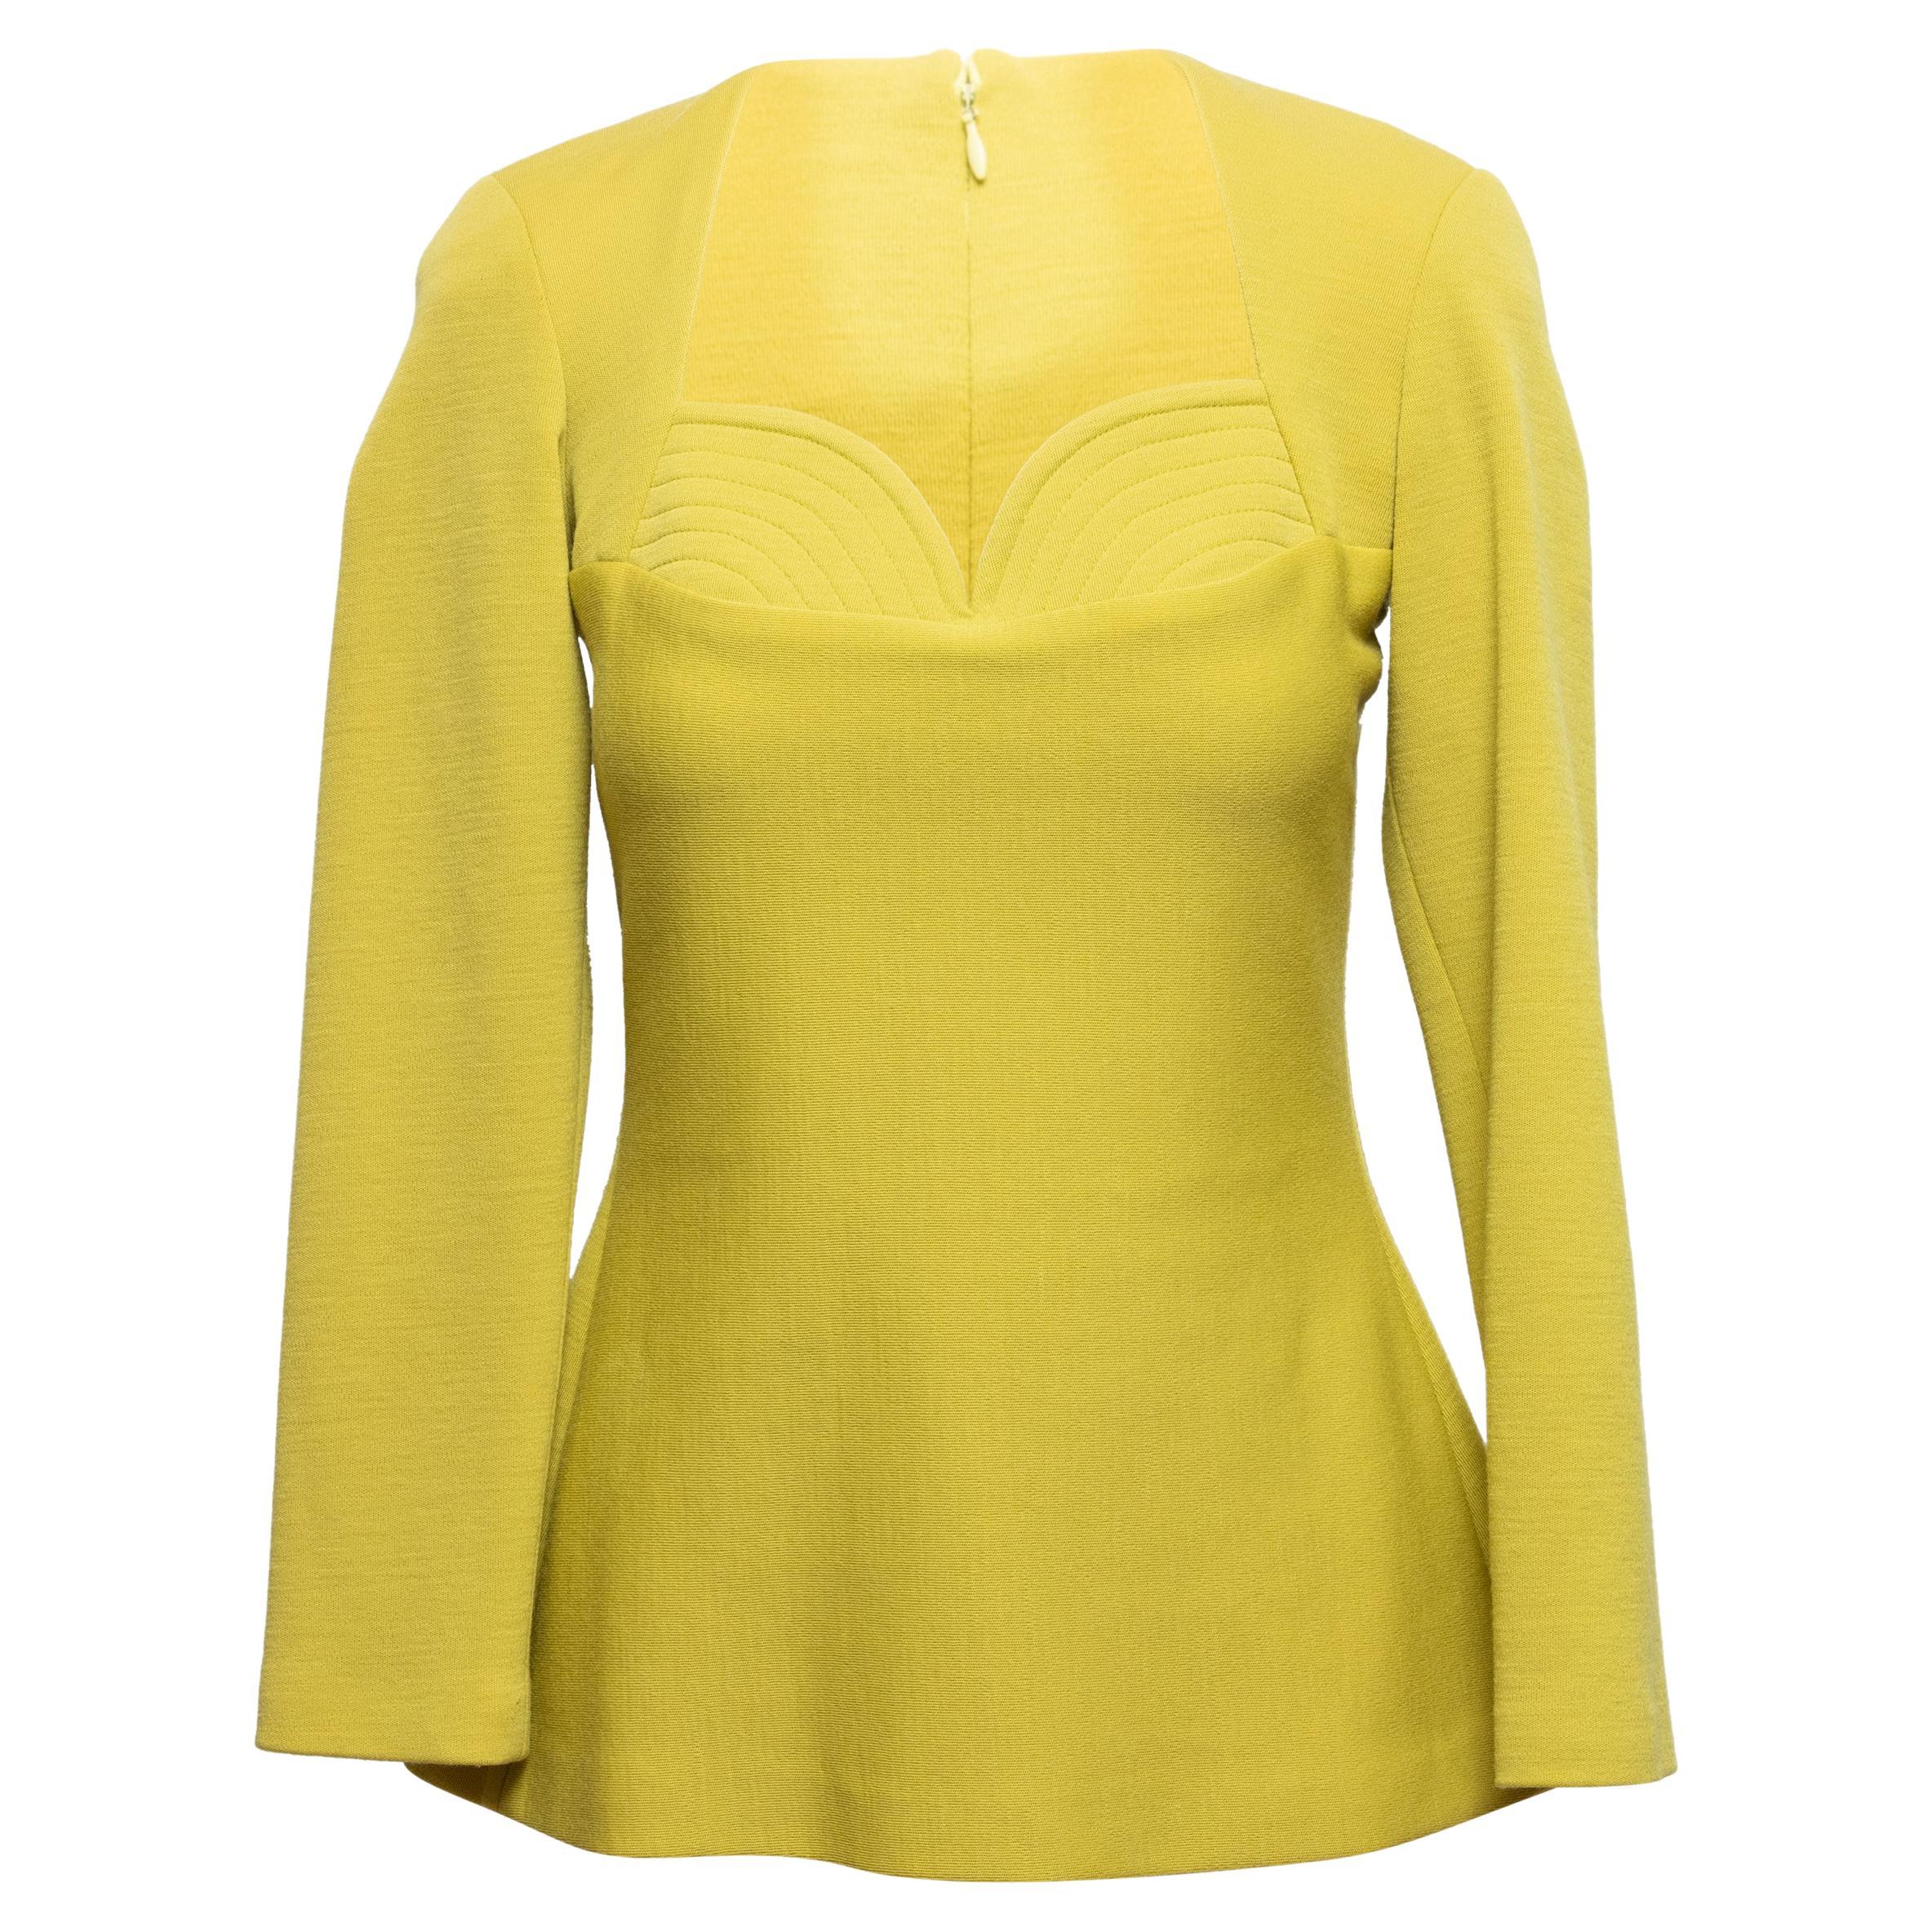 Vintage Chartreuse Marc Bouwer Long Sleeve Top For Sale